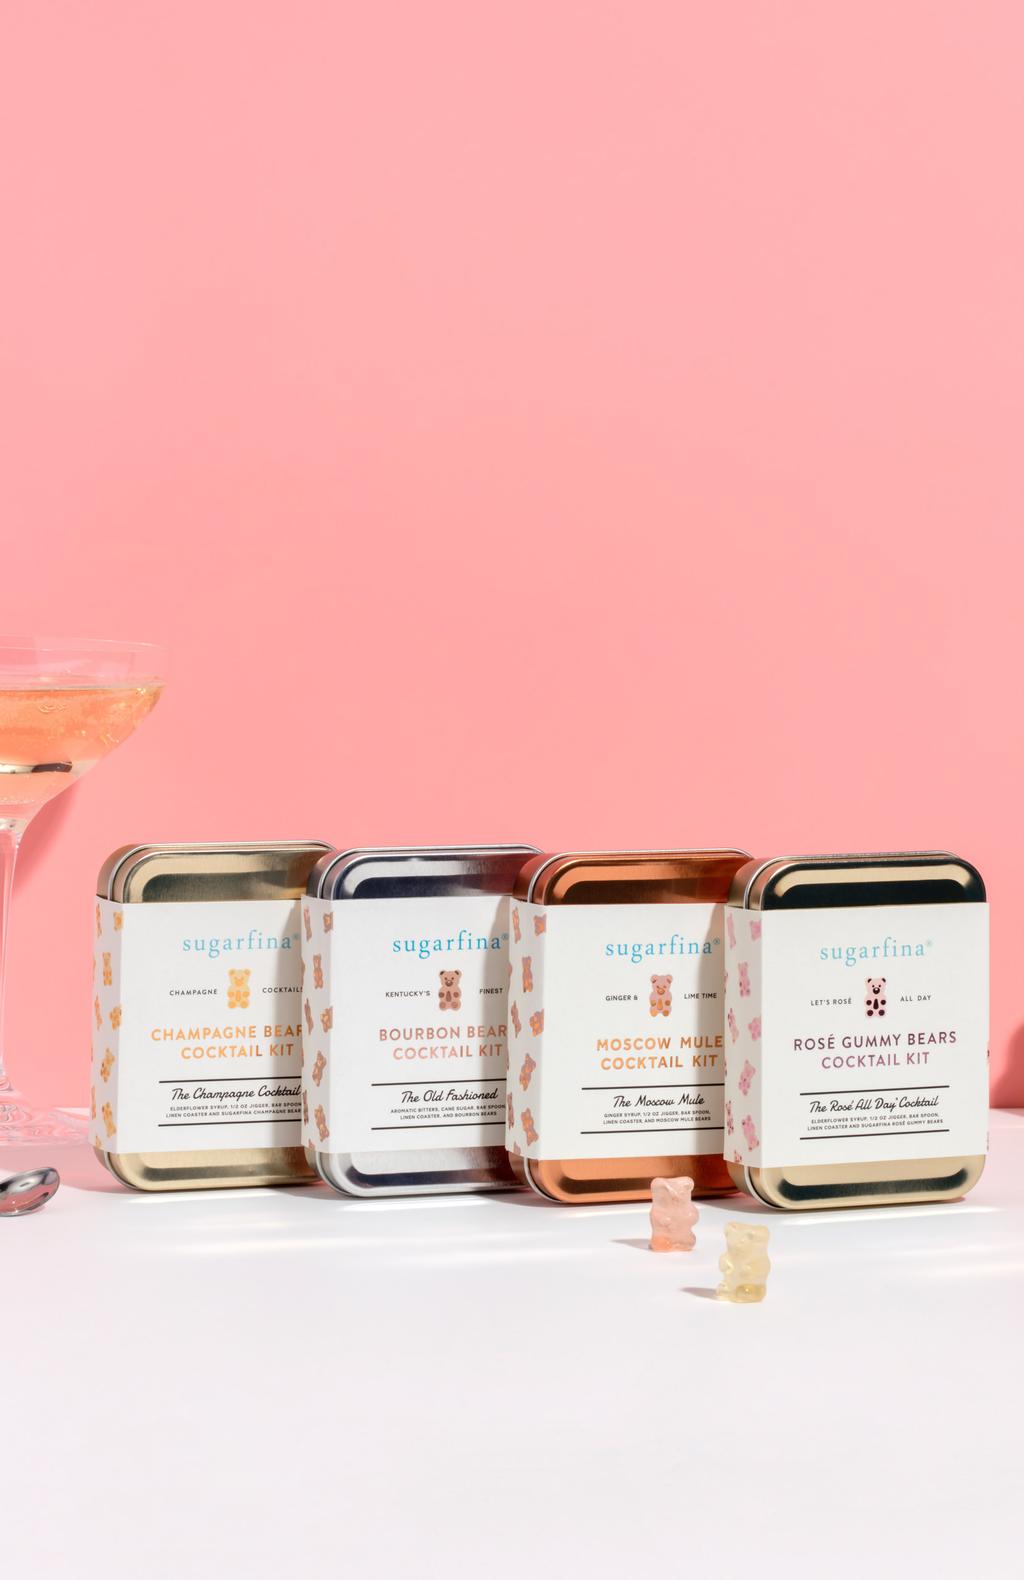 INTRODUCING THE Sugarfina Cocktail Kits A collaboration with the creative candy team at Sugarfina, these limited